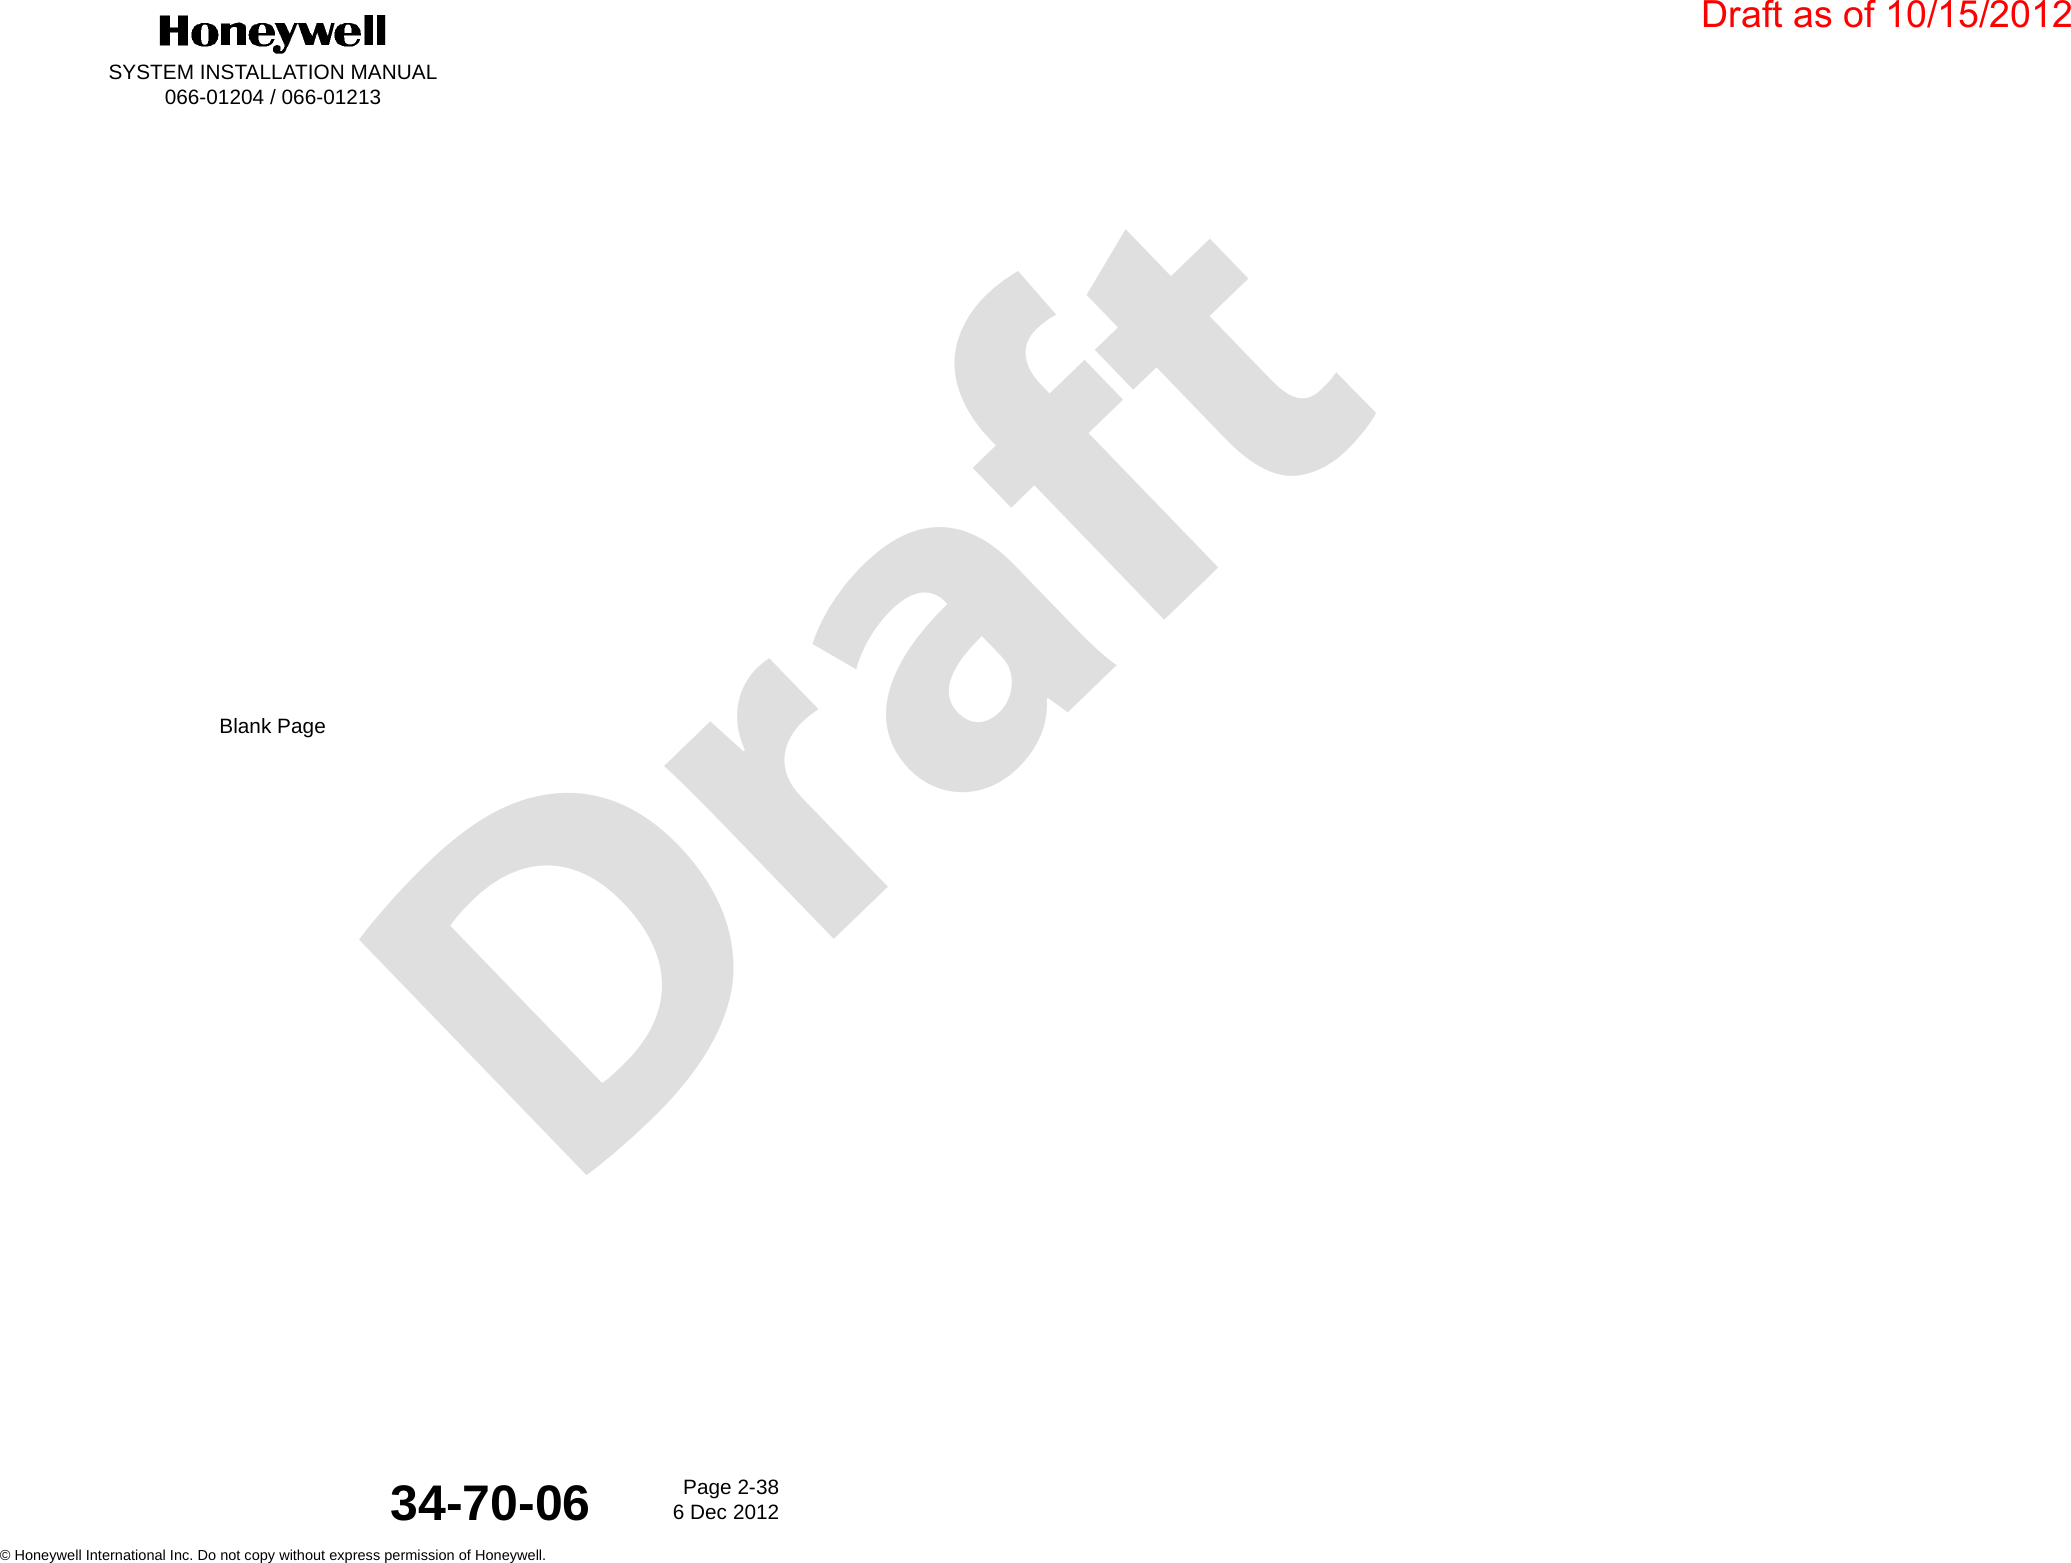 DraftSYSTEM INSTALLATION MANUAL066-01204 / 066-01213Page 2-386 Dec 2012© Honeywell International Inc. Do not copy without express permission of Honeywell.34-70-06Blank PageDraft as of 10/15/2012